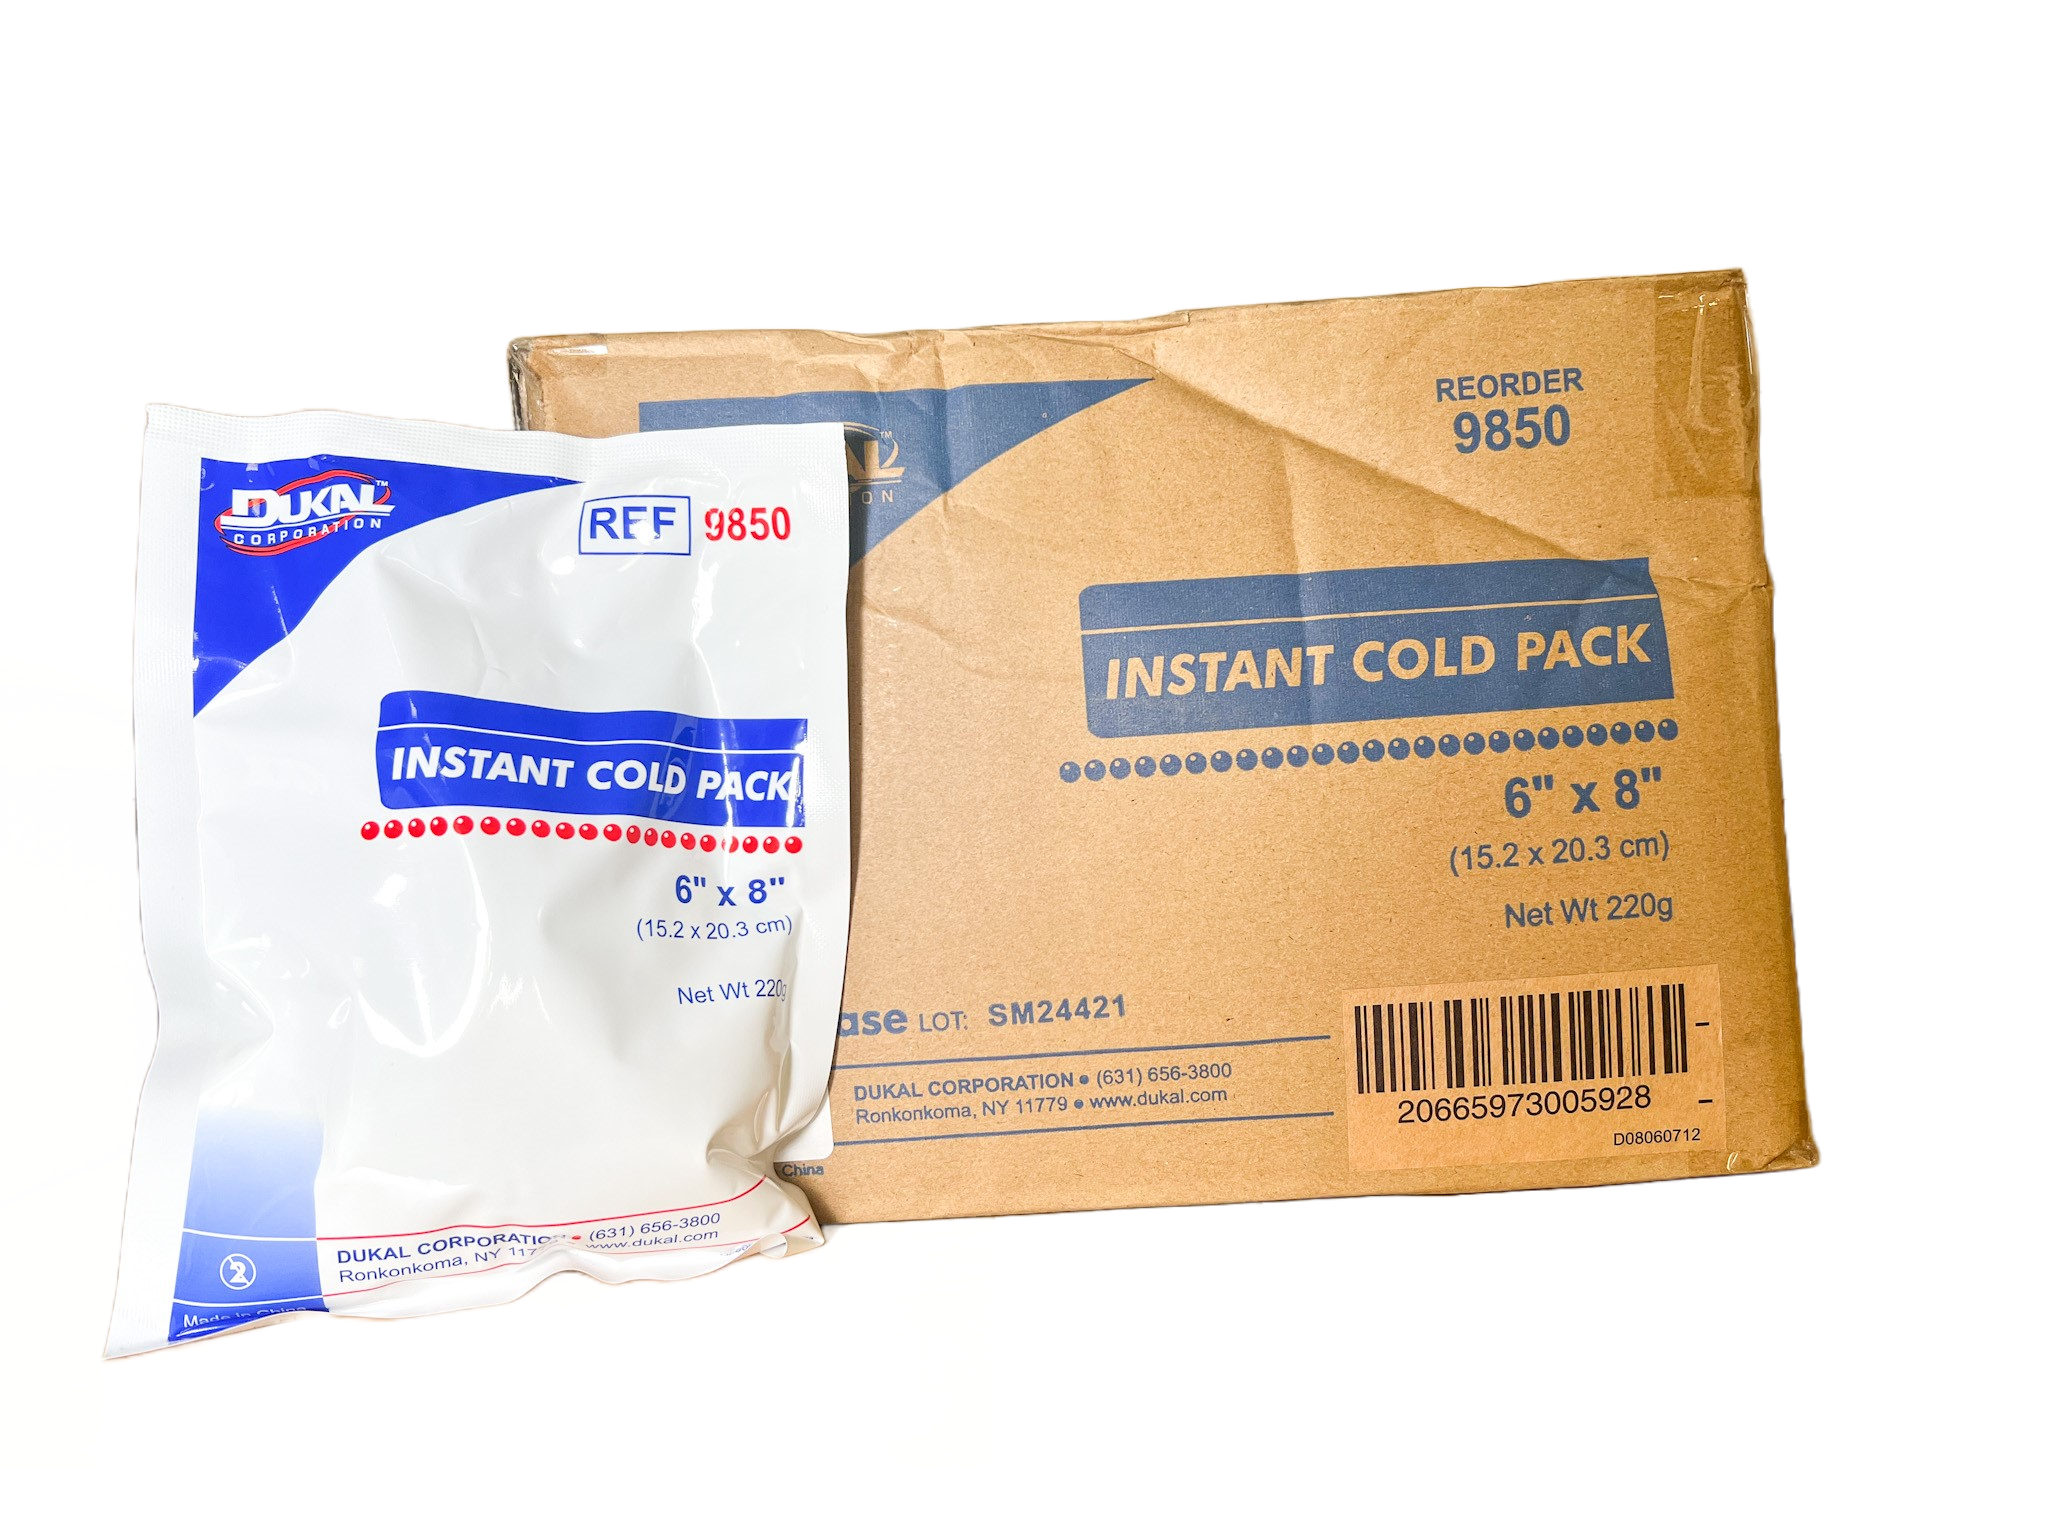 Dynarex Non-Toxic Instant Cold Pack 5 x 9 (24/cs)